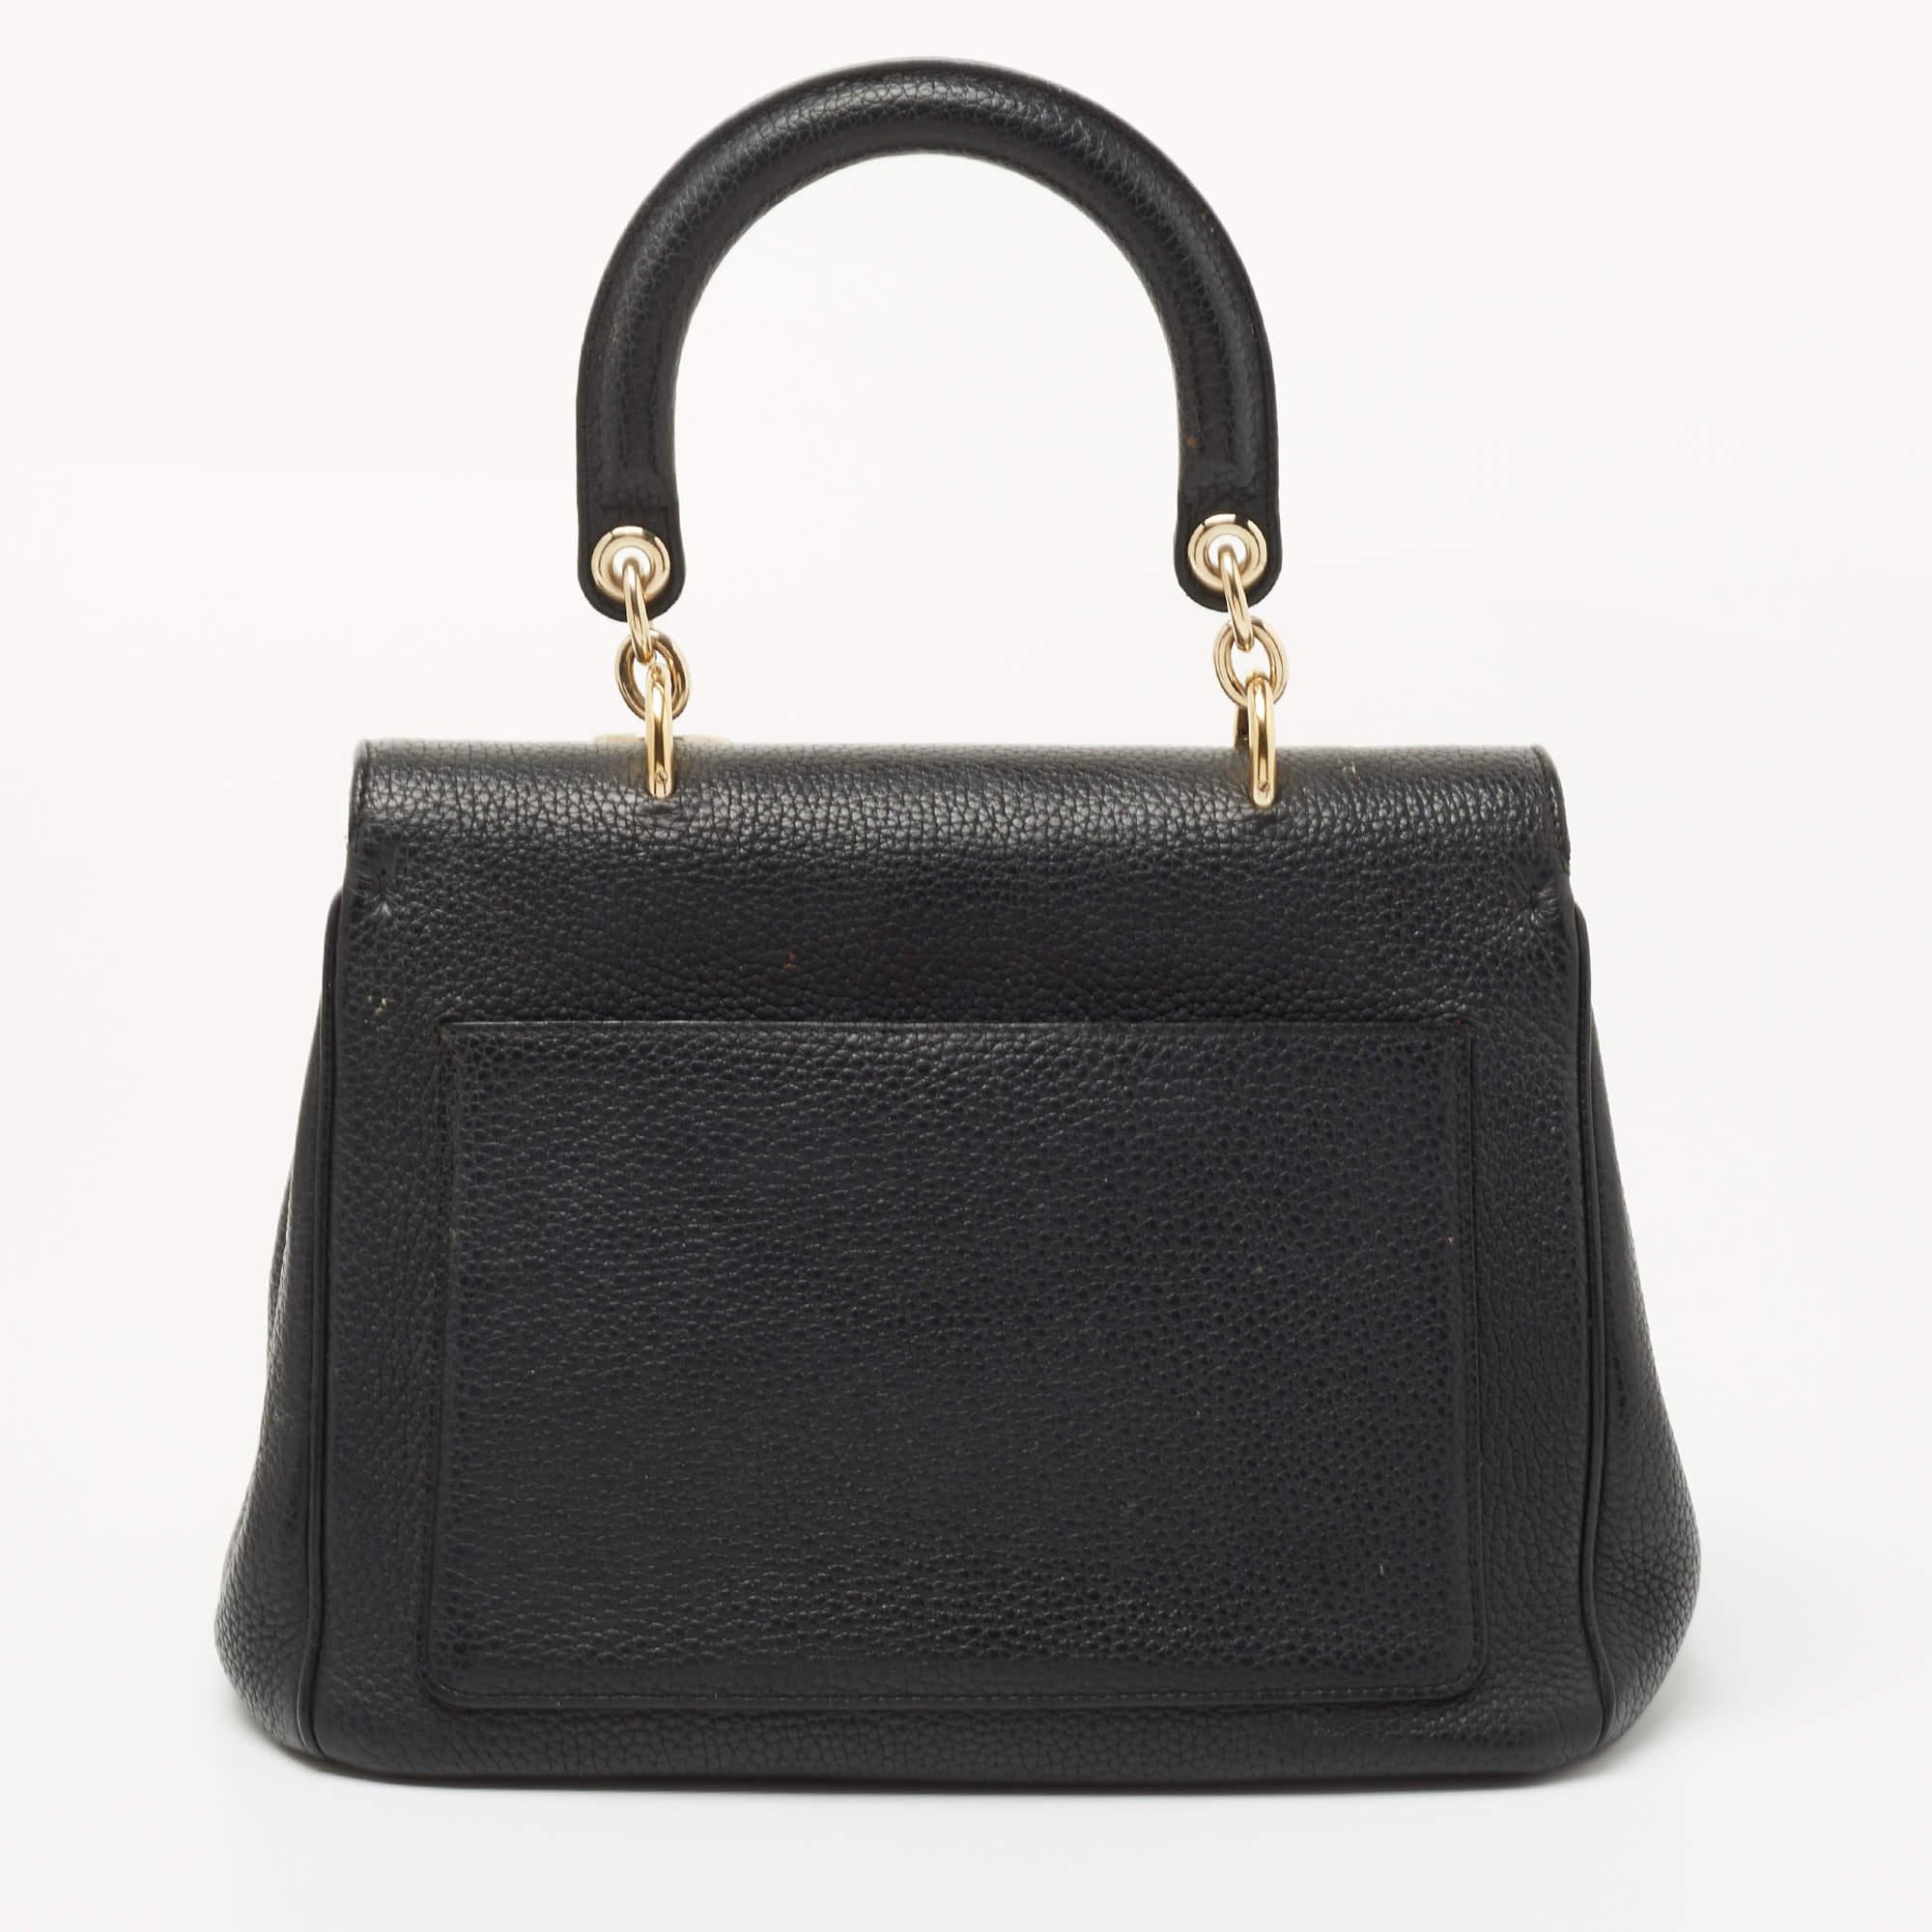 This Be Dior bag from the House of Dior is sure to add sparks of luxury to your wardrobe! It is crafted using black leather on the exterior, with the signature D.I.O.R charms embellishing the front. It has a top handle, gold-toned hardware, and an